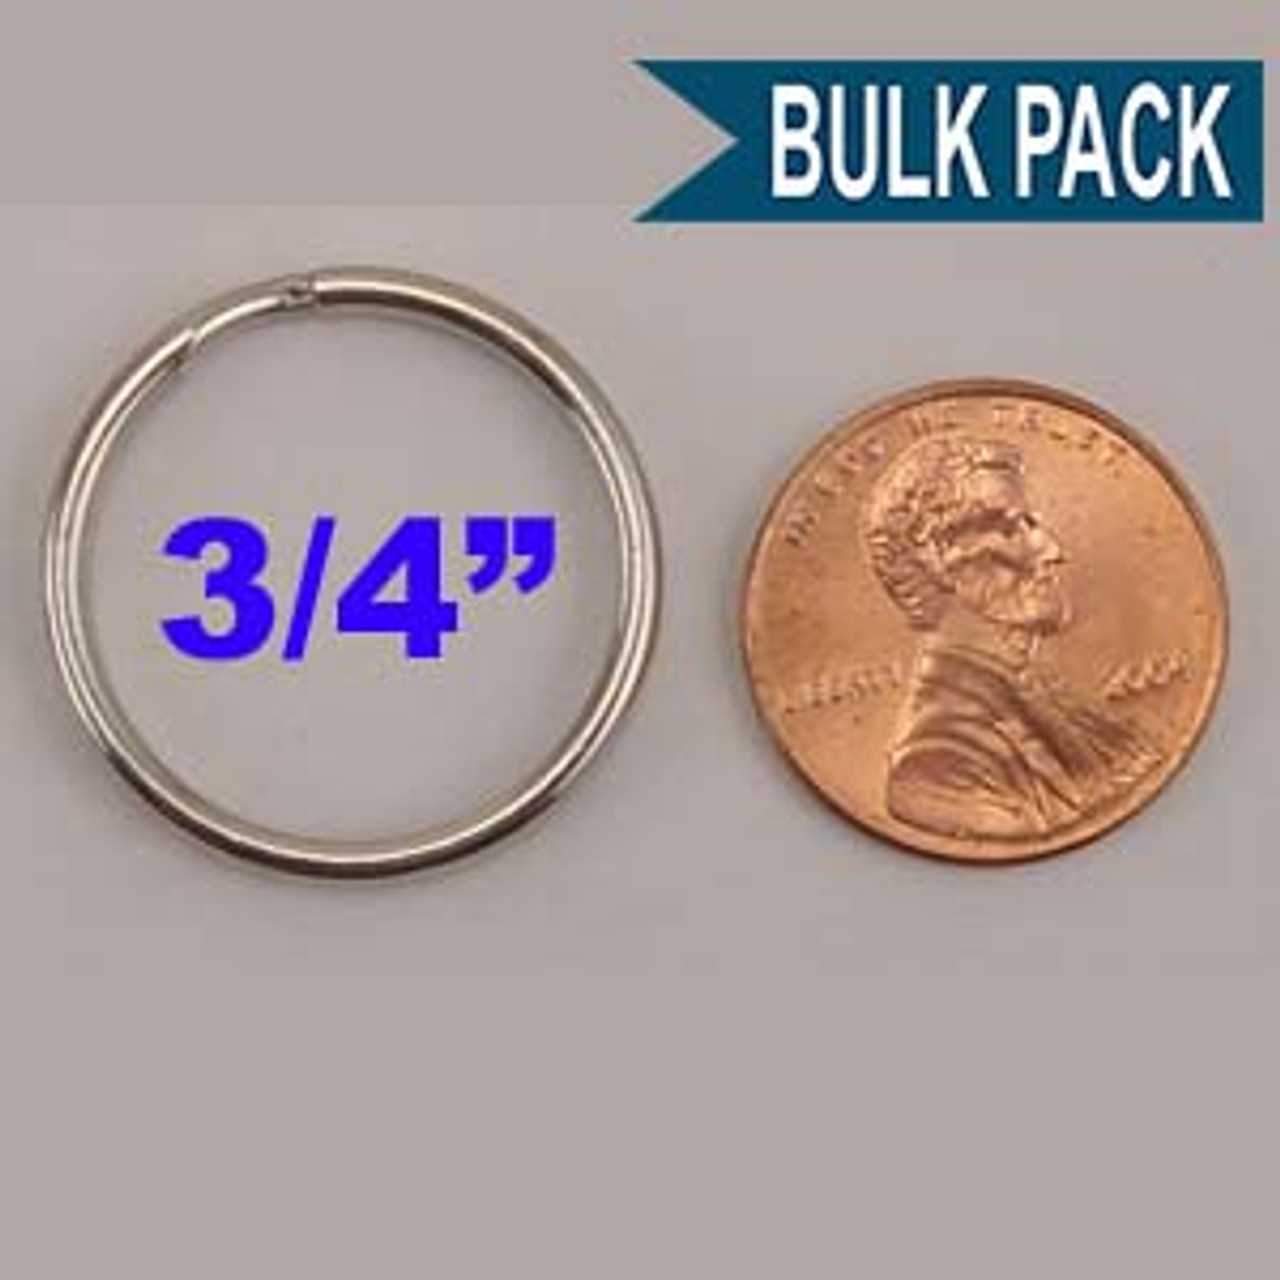 Shop for and Buy Brass Plated Split Key Ring 1 Inch Diameter-Bulk Pack of  100 at . Large selection and bulk discounts available.